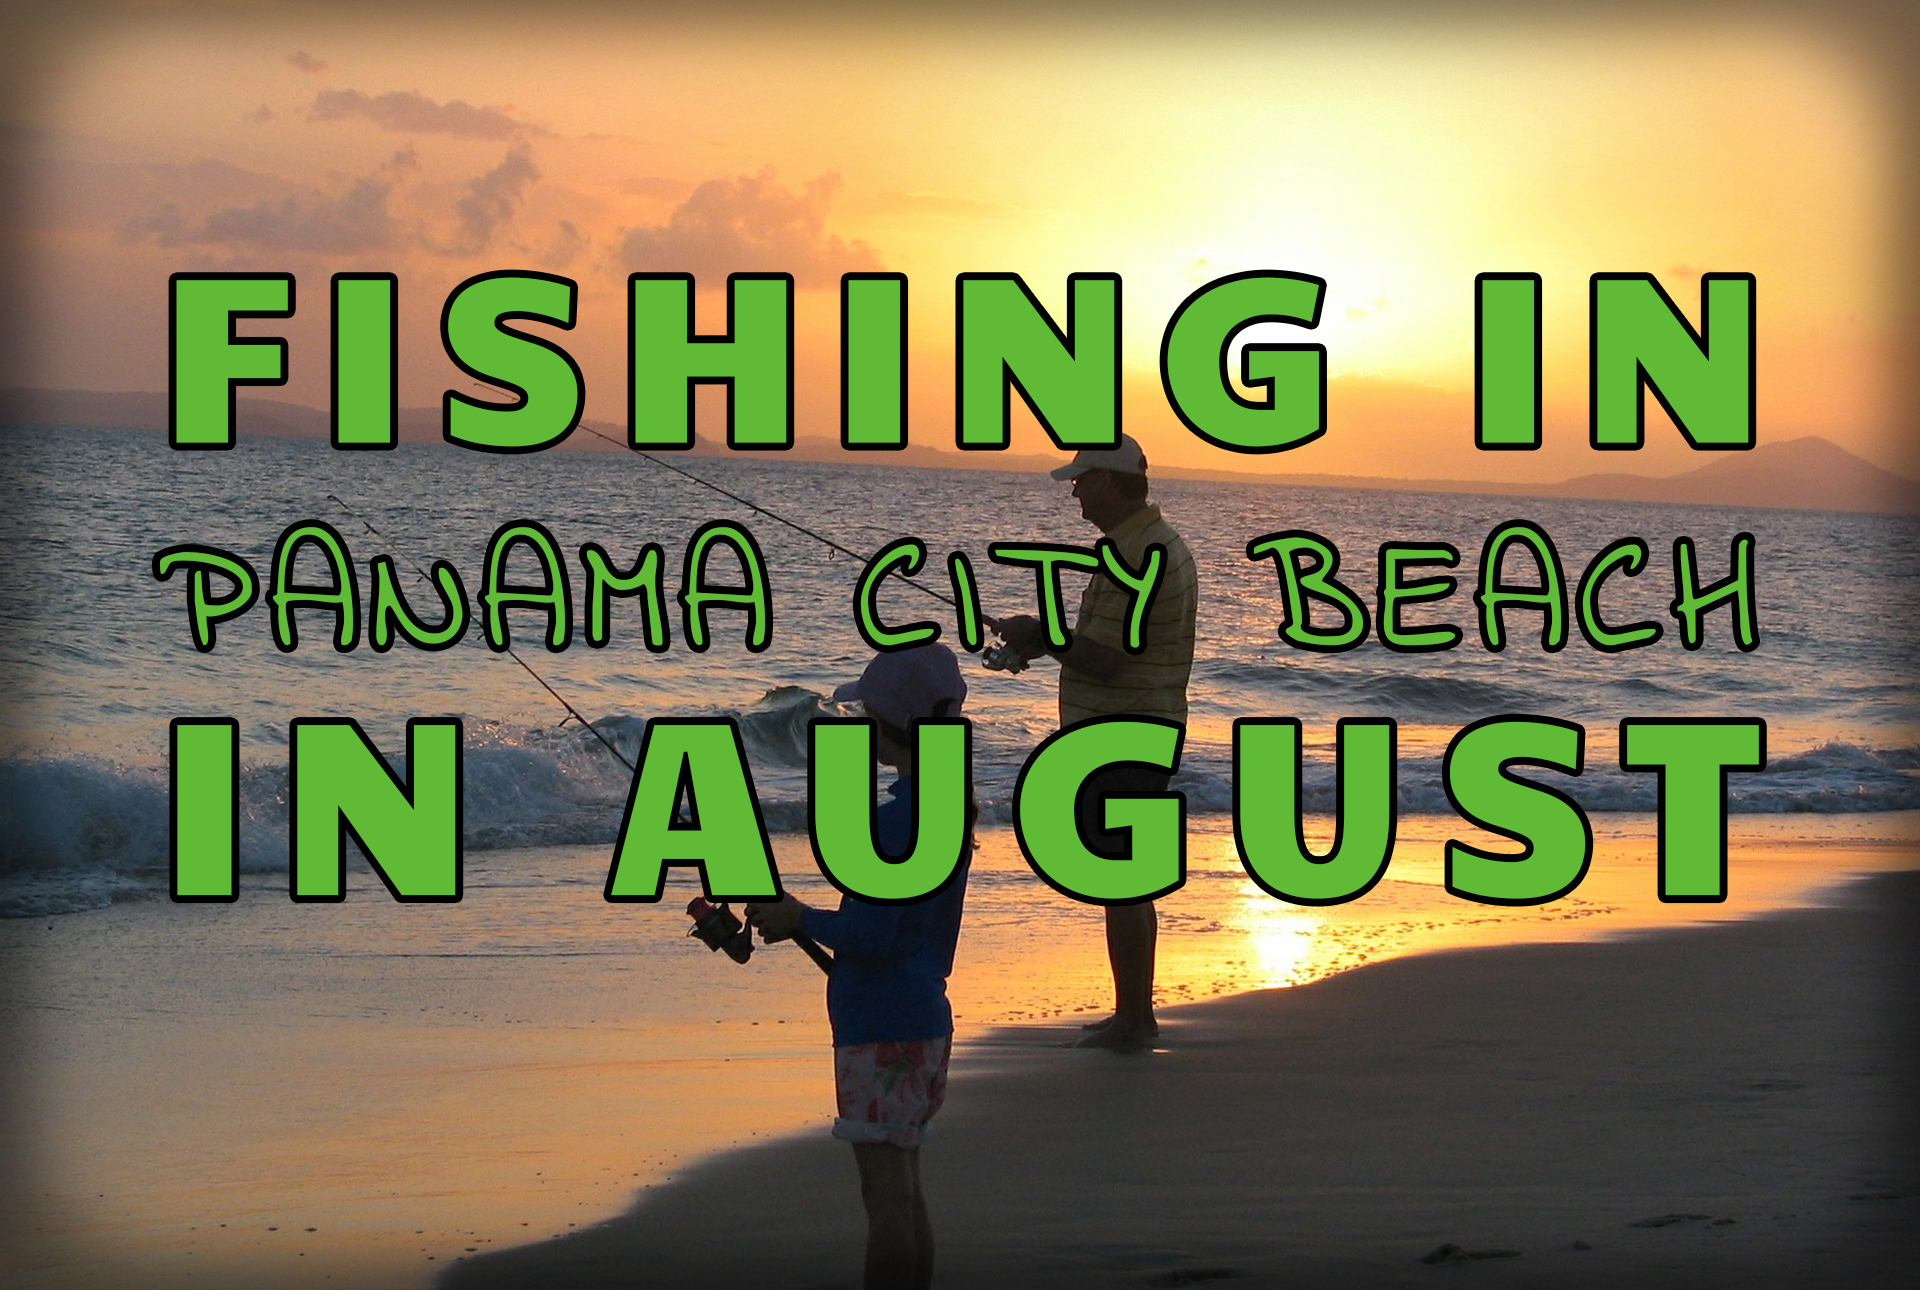 "Fishing in Panama City Beach in August" over an image of a father and daughter shore fishing